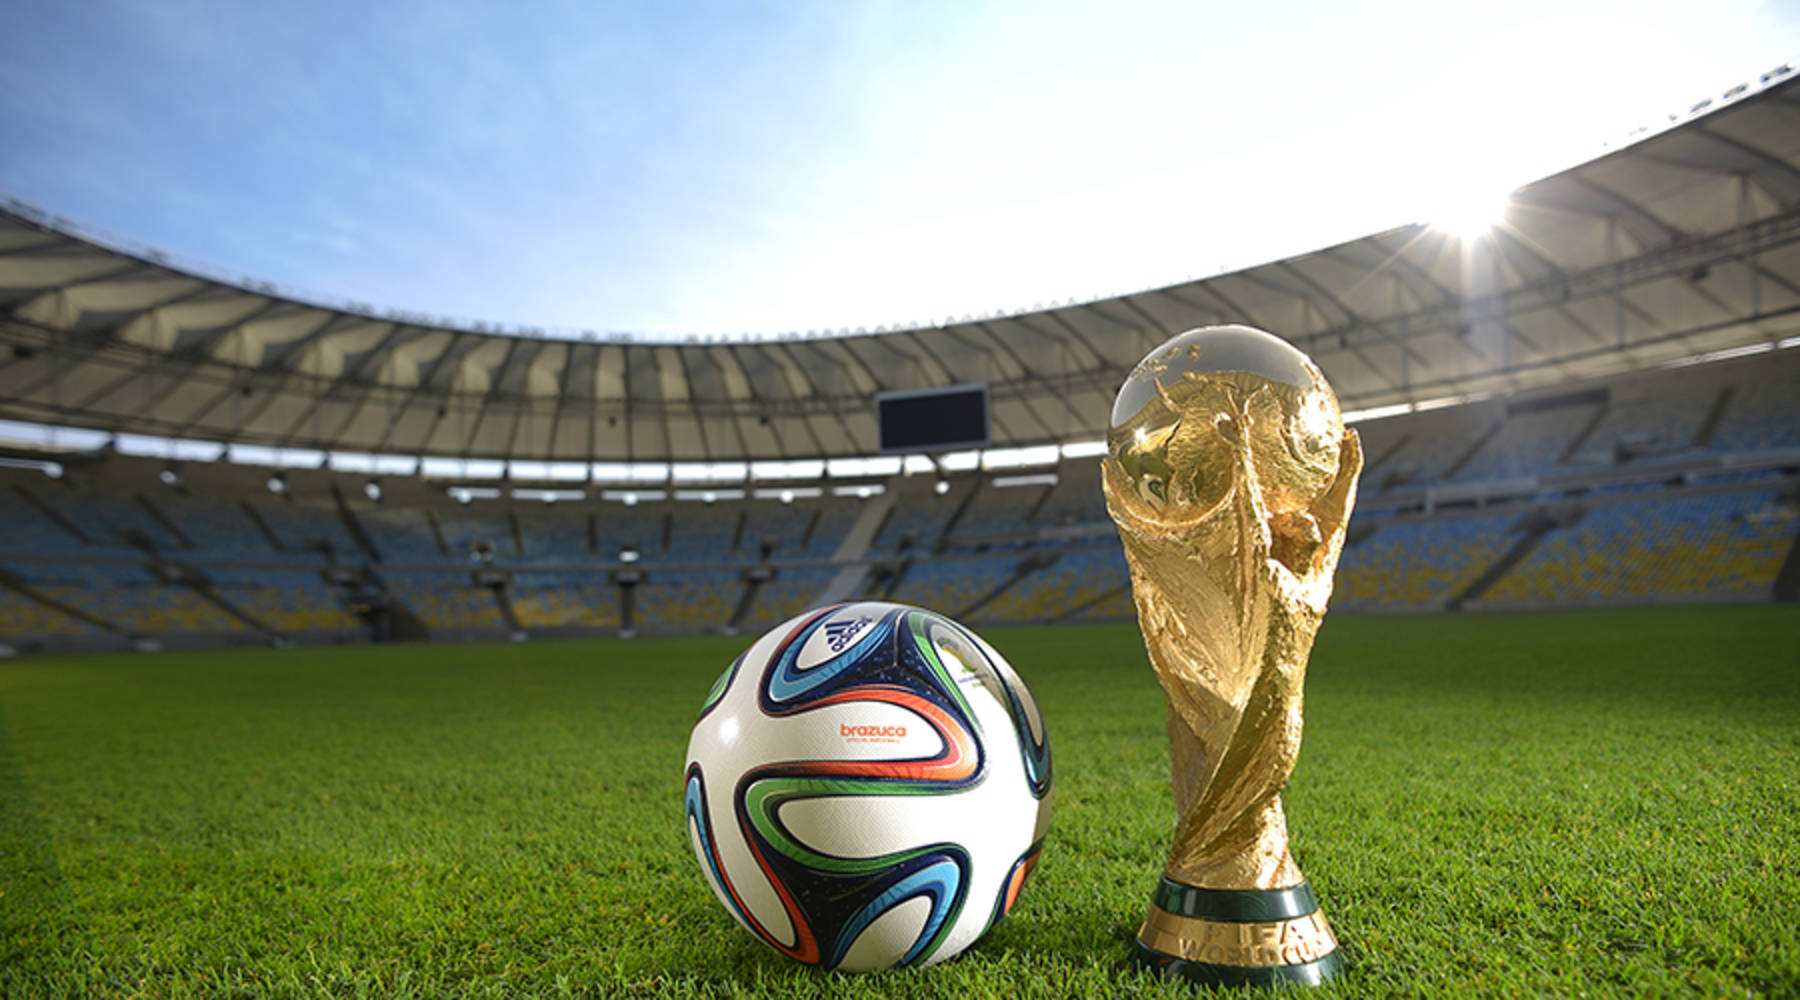 More than half of adults across 34 countries plan to watch the 2022 FIFA  World Cup